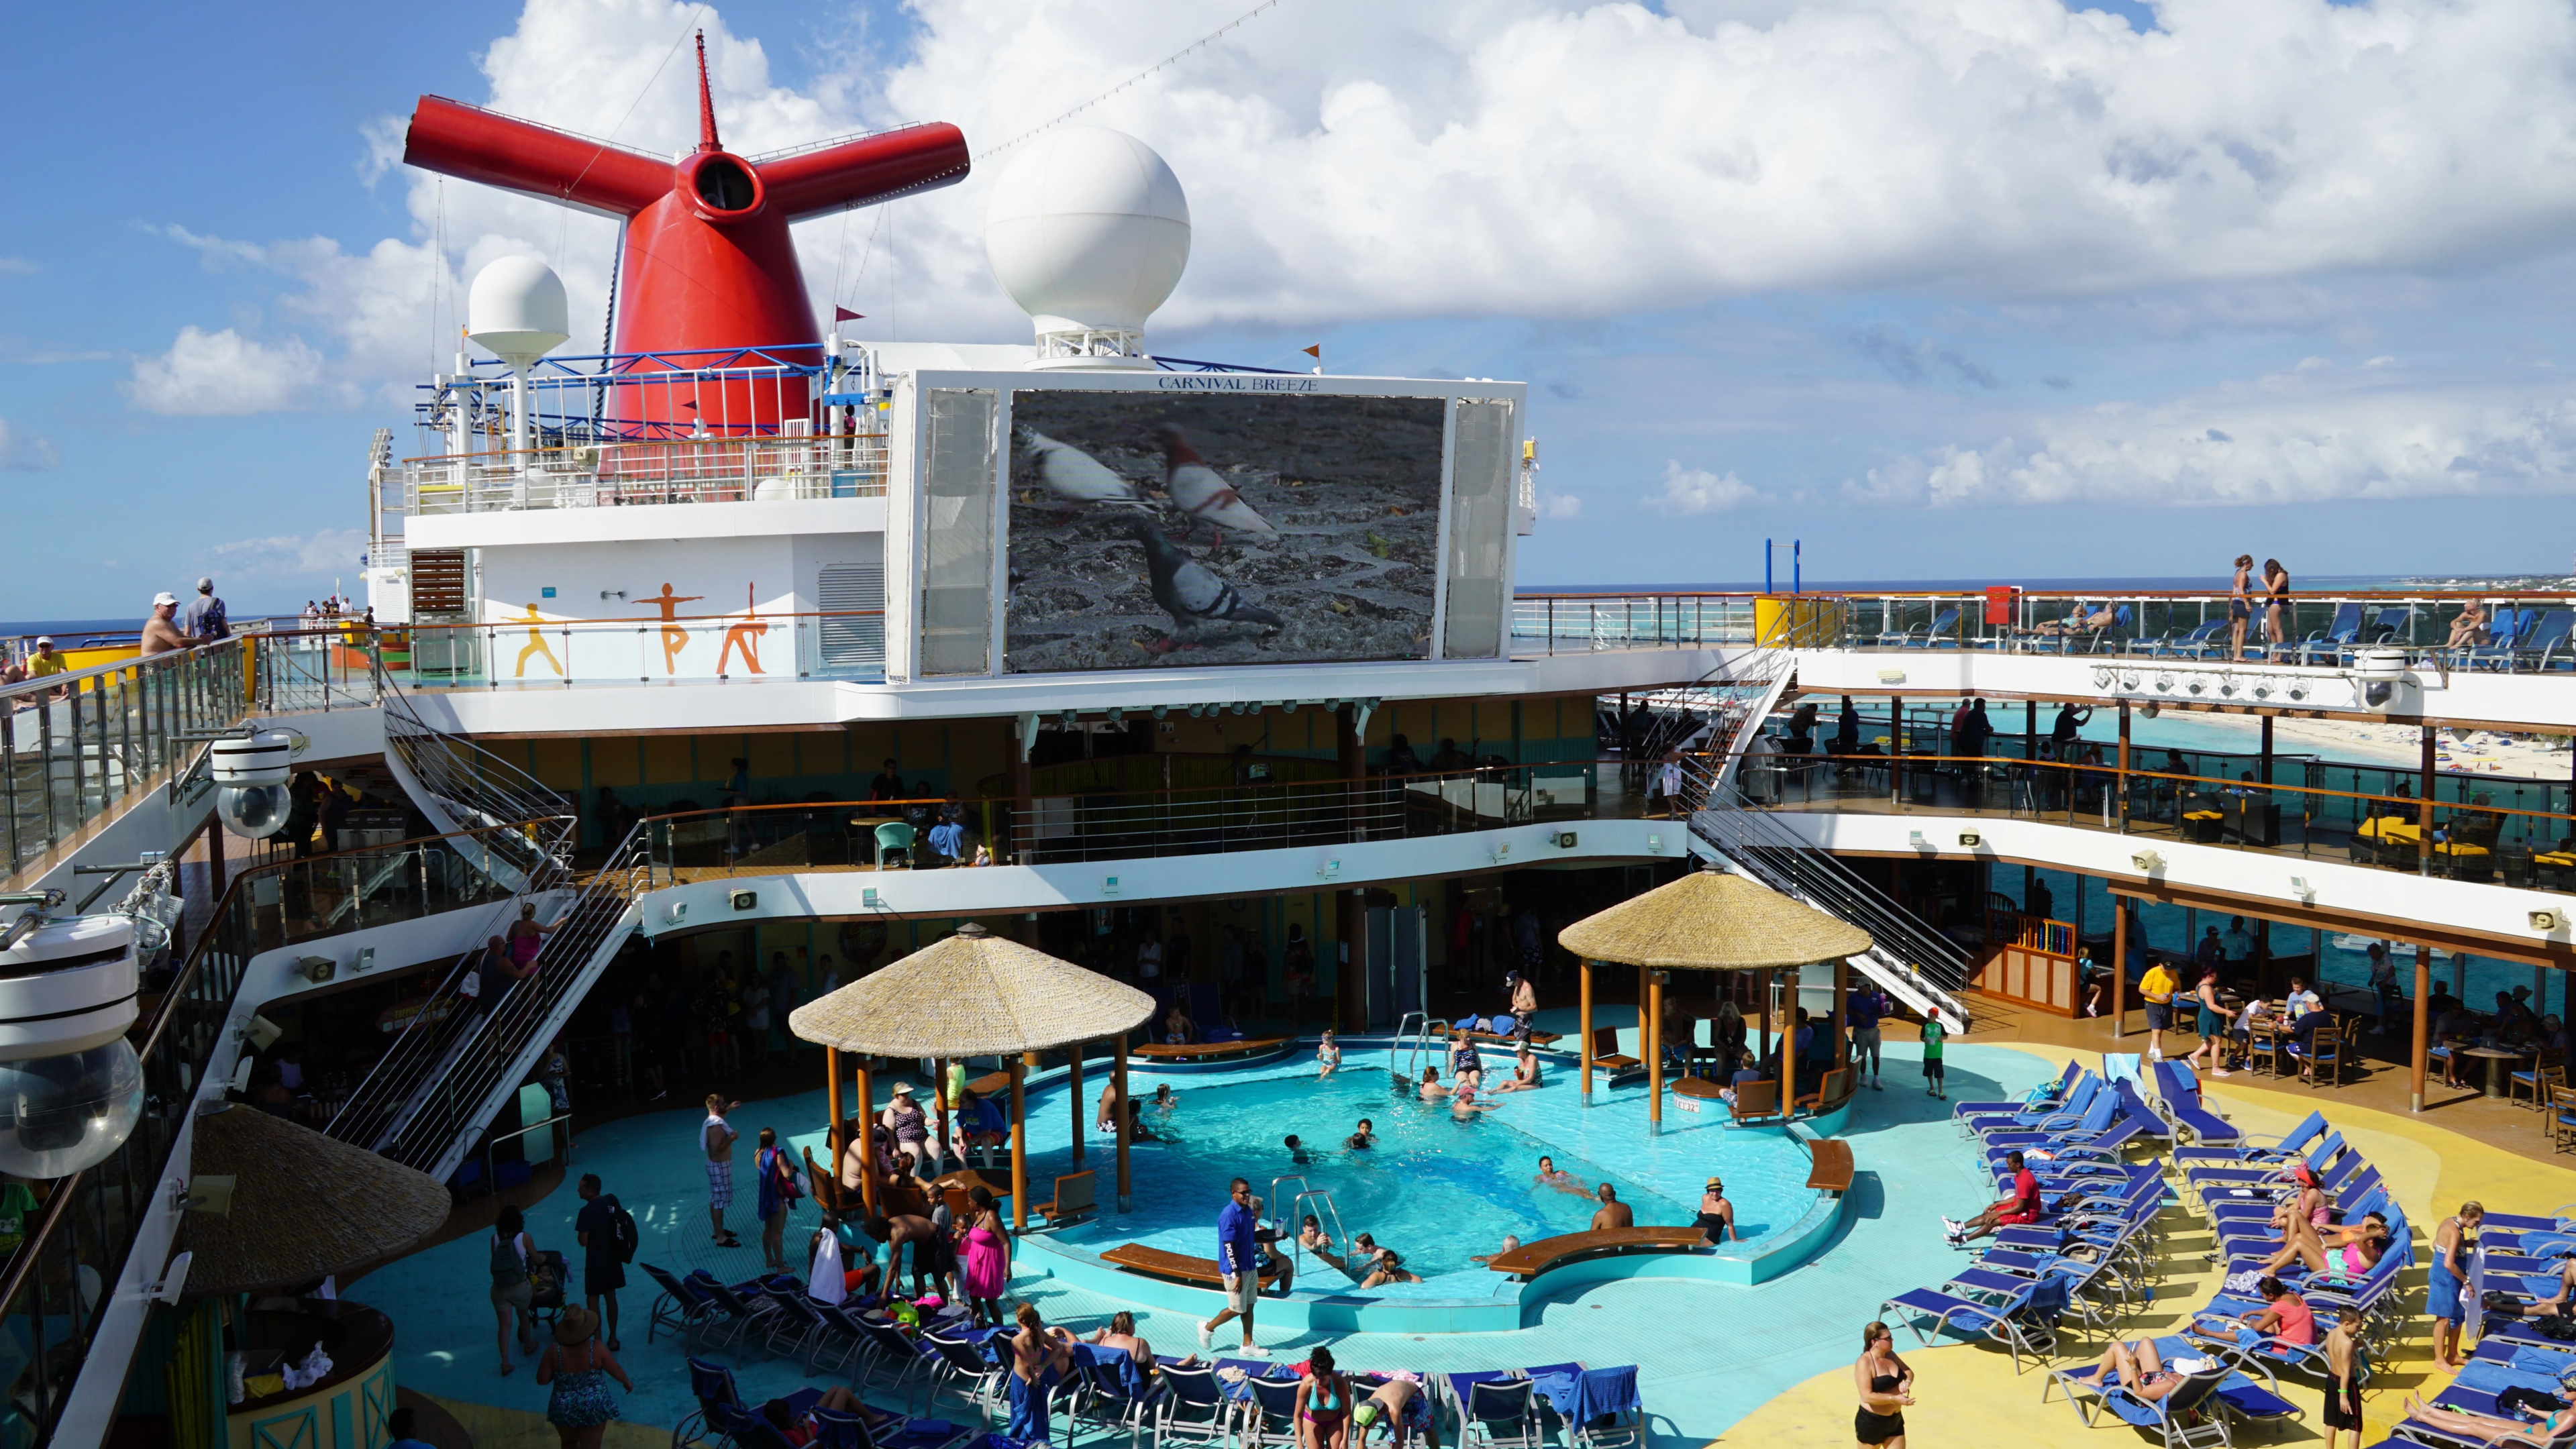 Lido Deck - Poolside on the Carnival Breeze docked in Miami, Florida, on Nov 21, 2015. The Breeze is a Dream-class cruise ship owned by Carnival Cruise which entered service in June 2012